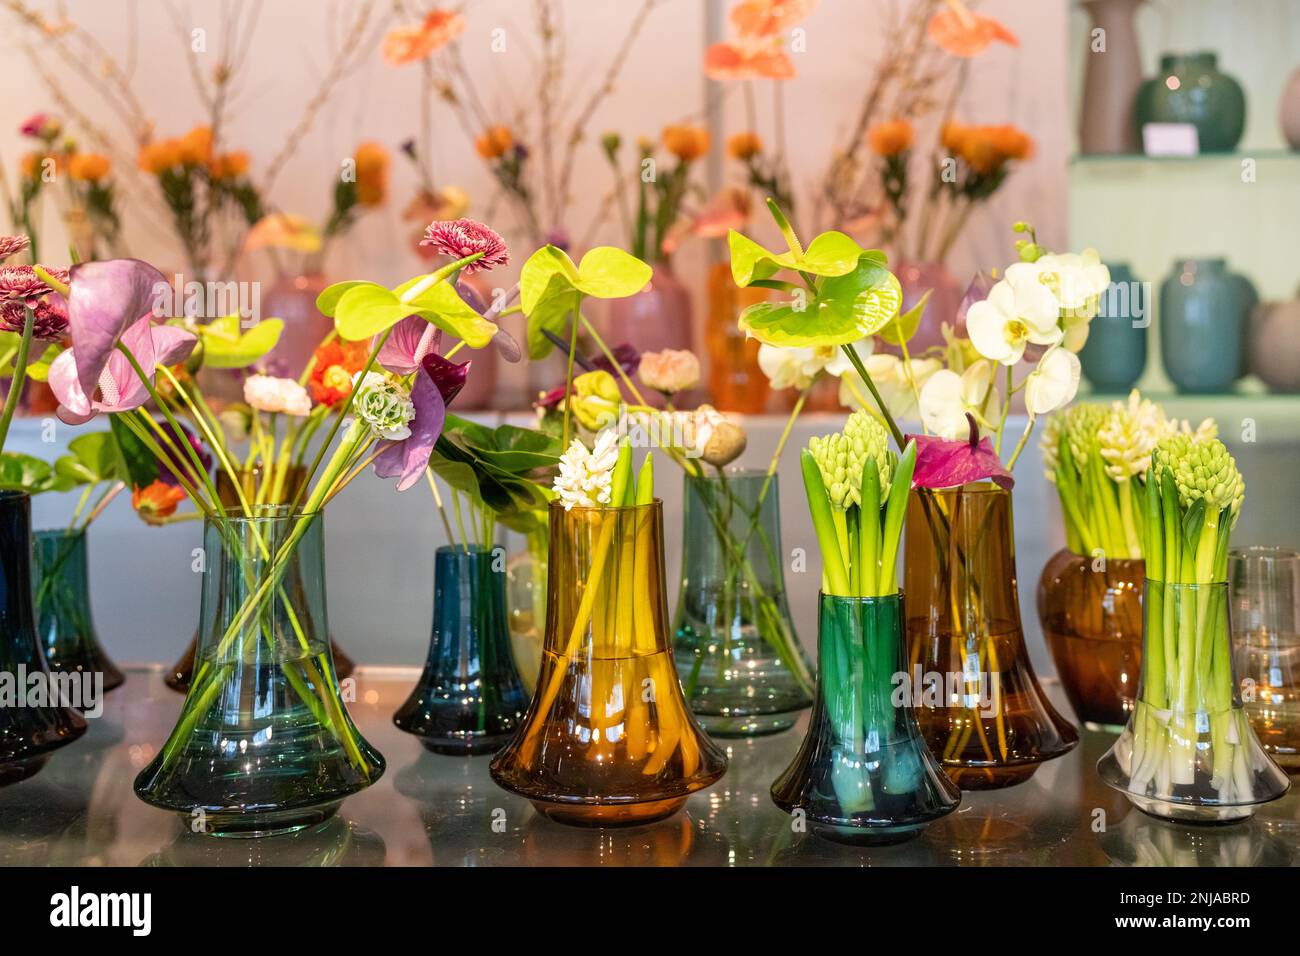 Decorative glass vases with spring flowers. Hyacinths (Hyacinthus orientalis), flamingo flowers (Anthurium) and Orchids. Stock Photo